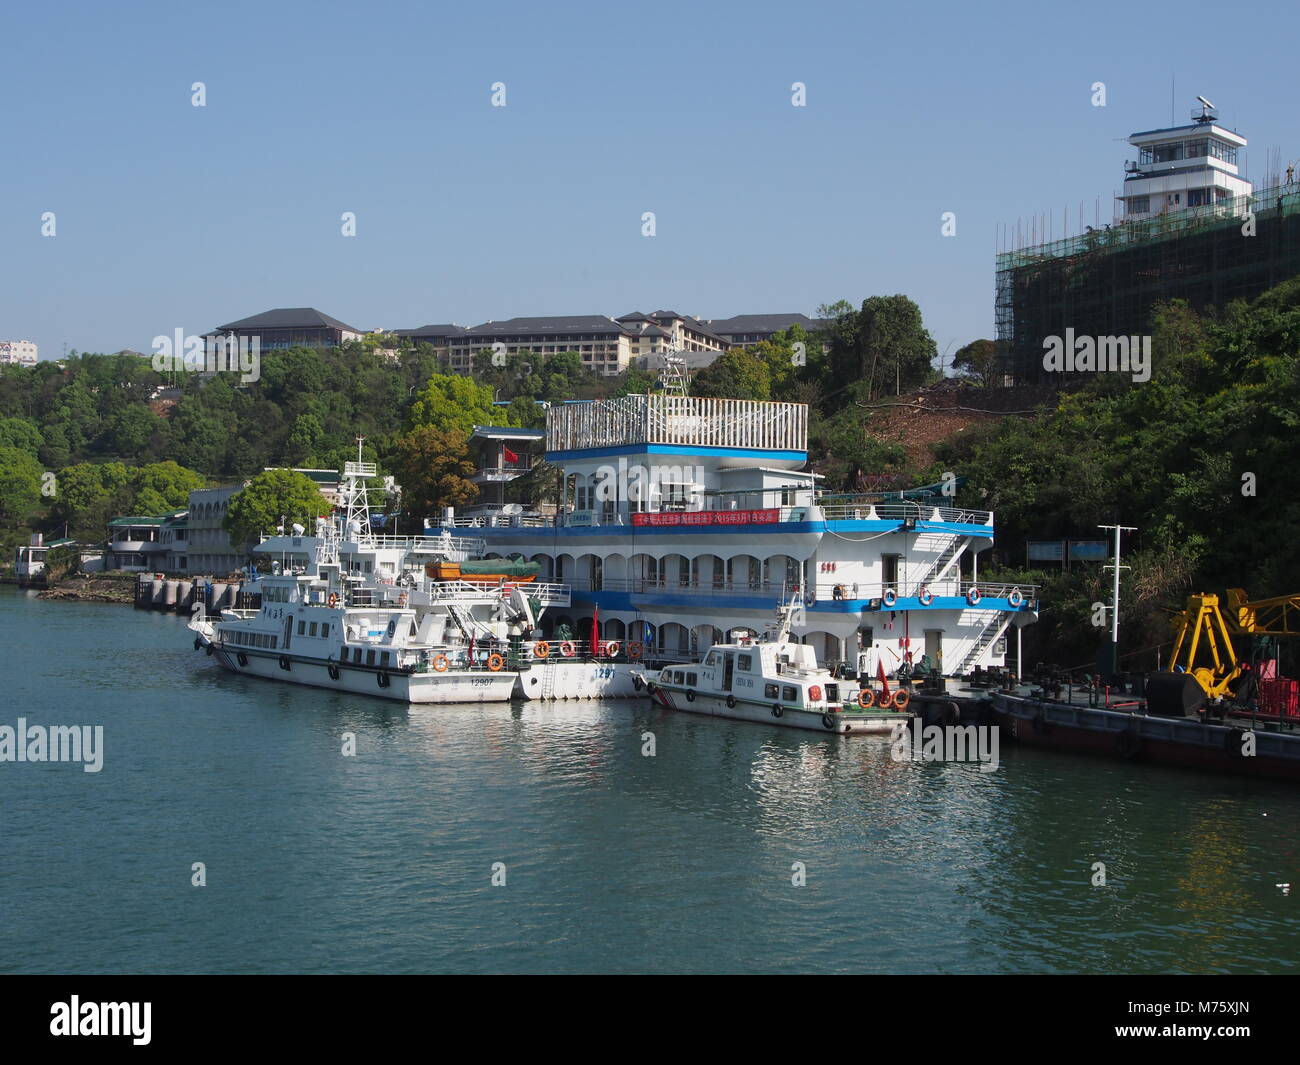 The River Cruise at Yichang Pier. Travel to Three Gorges Dam. Travel in Yichang City in Hubei, China in 2014, 11th April. Stock Photo